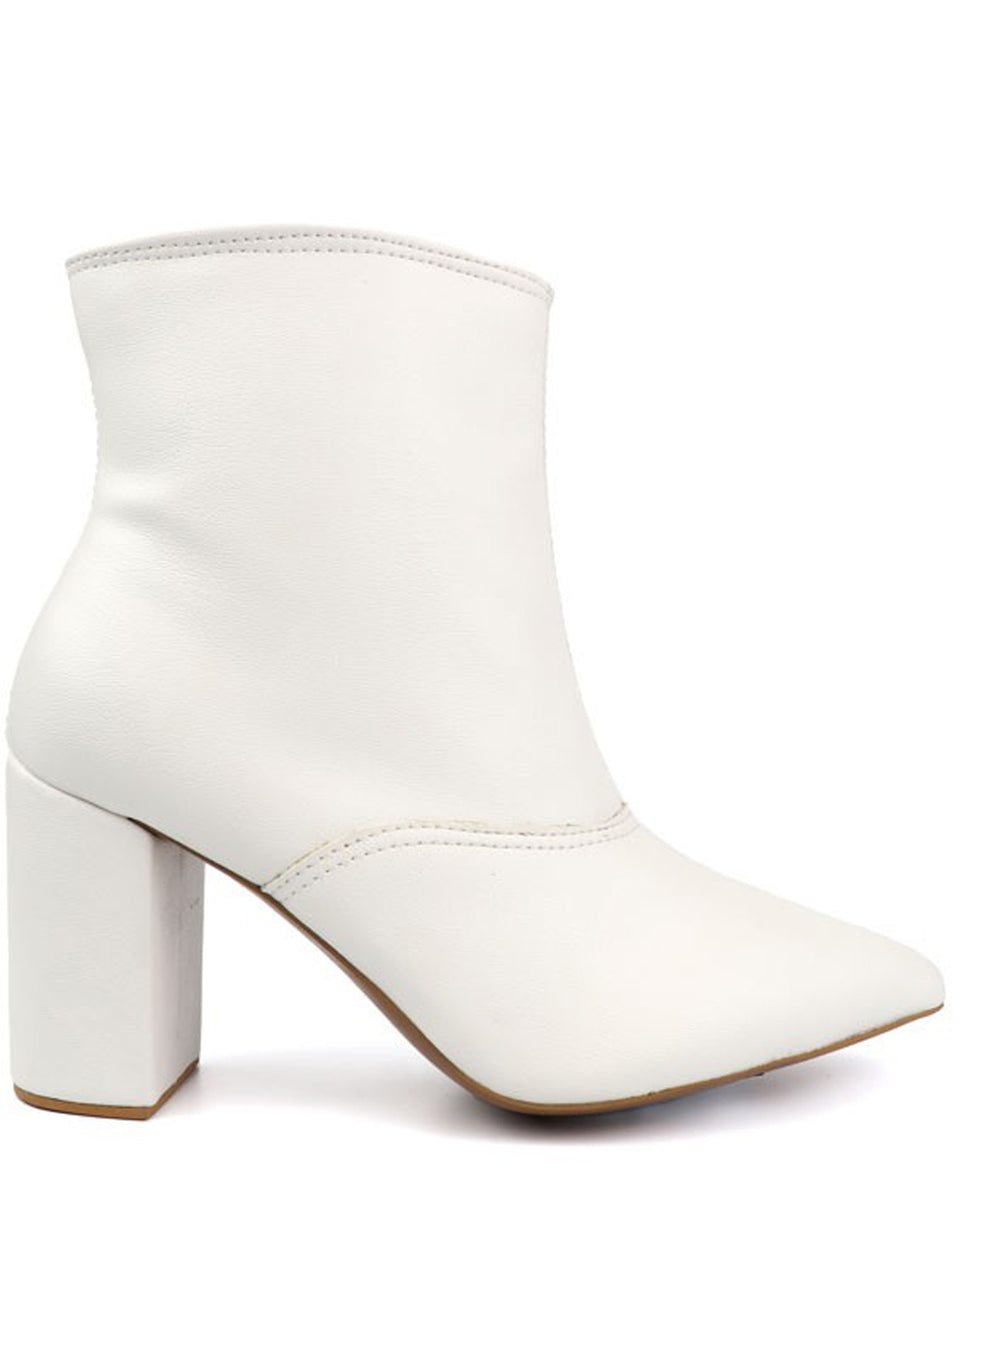 Pointed Toe Bootie with a Block Heel - Azoroh